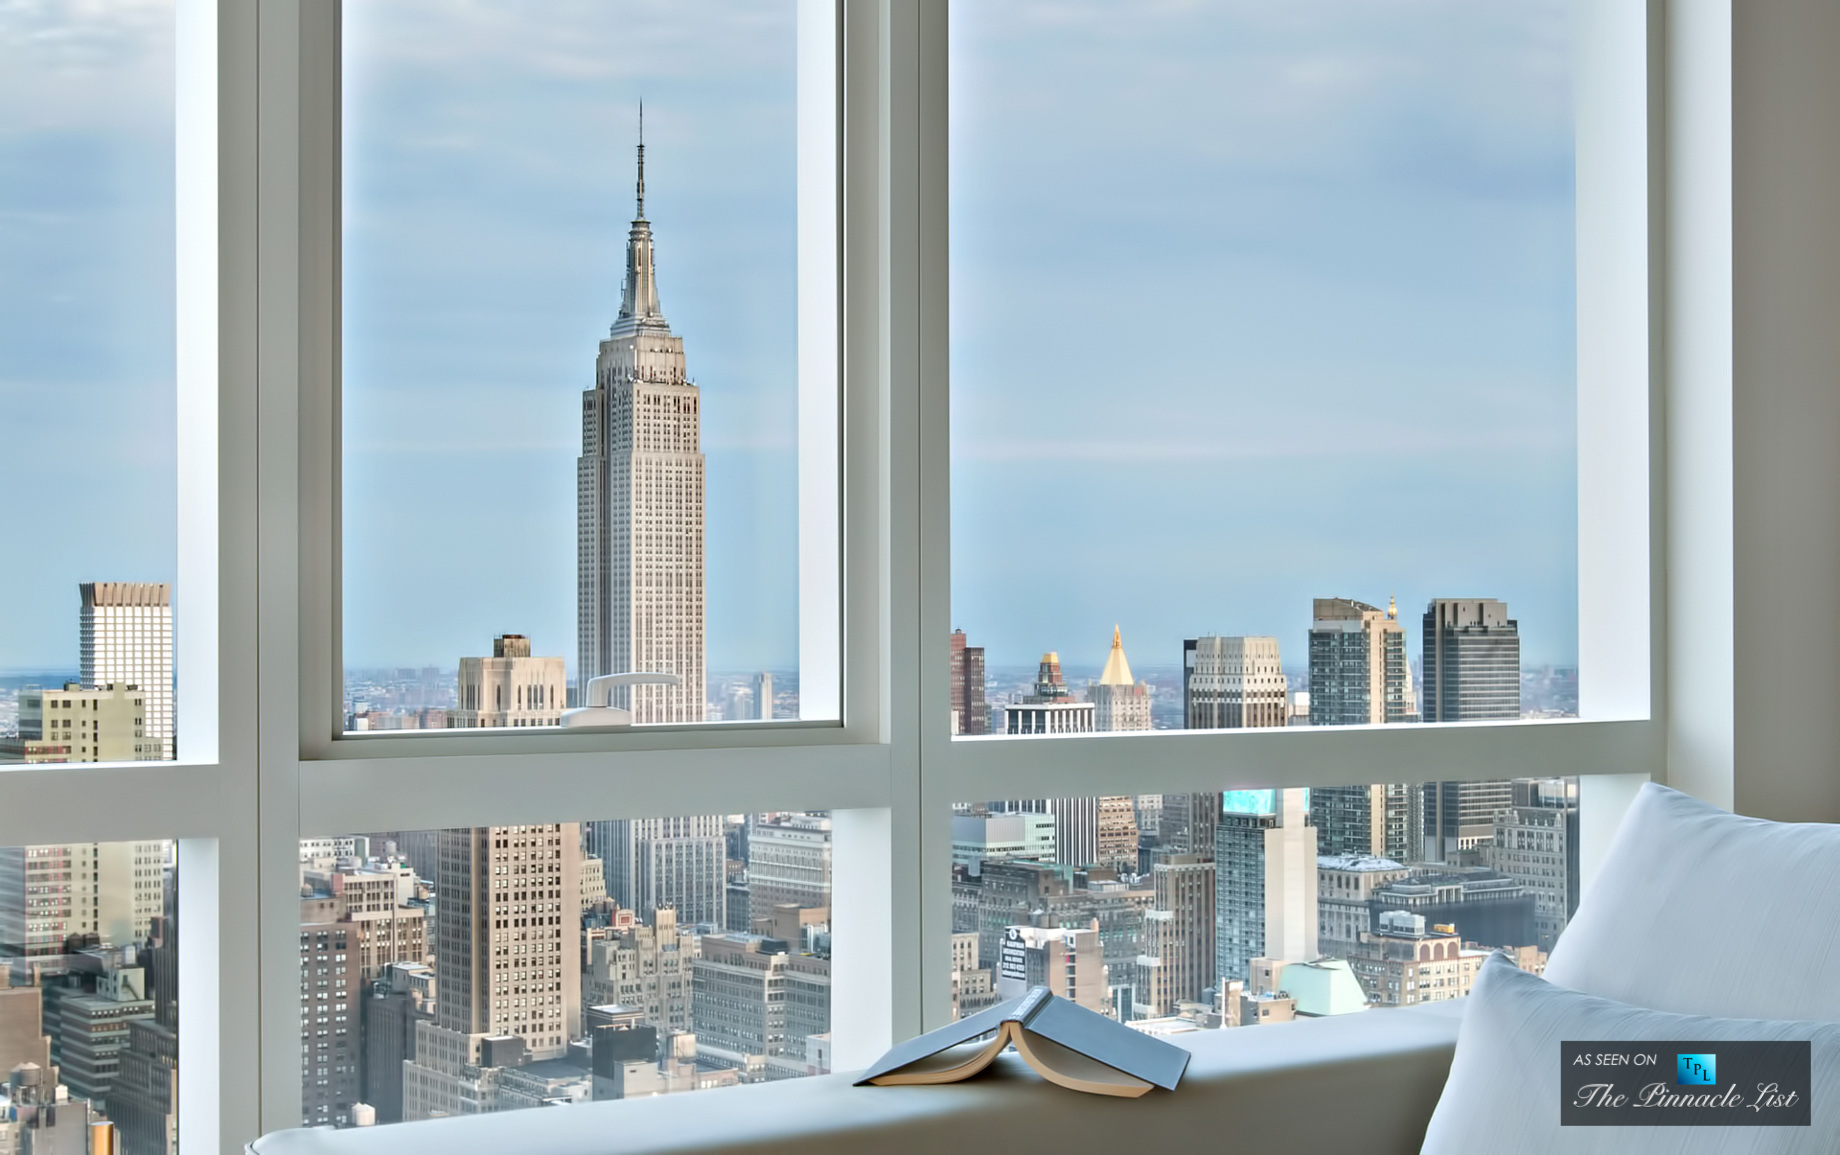 Manhattan View - Elevated NYC Living at Midtown’s Hottest New Condo Development